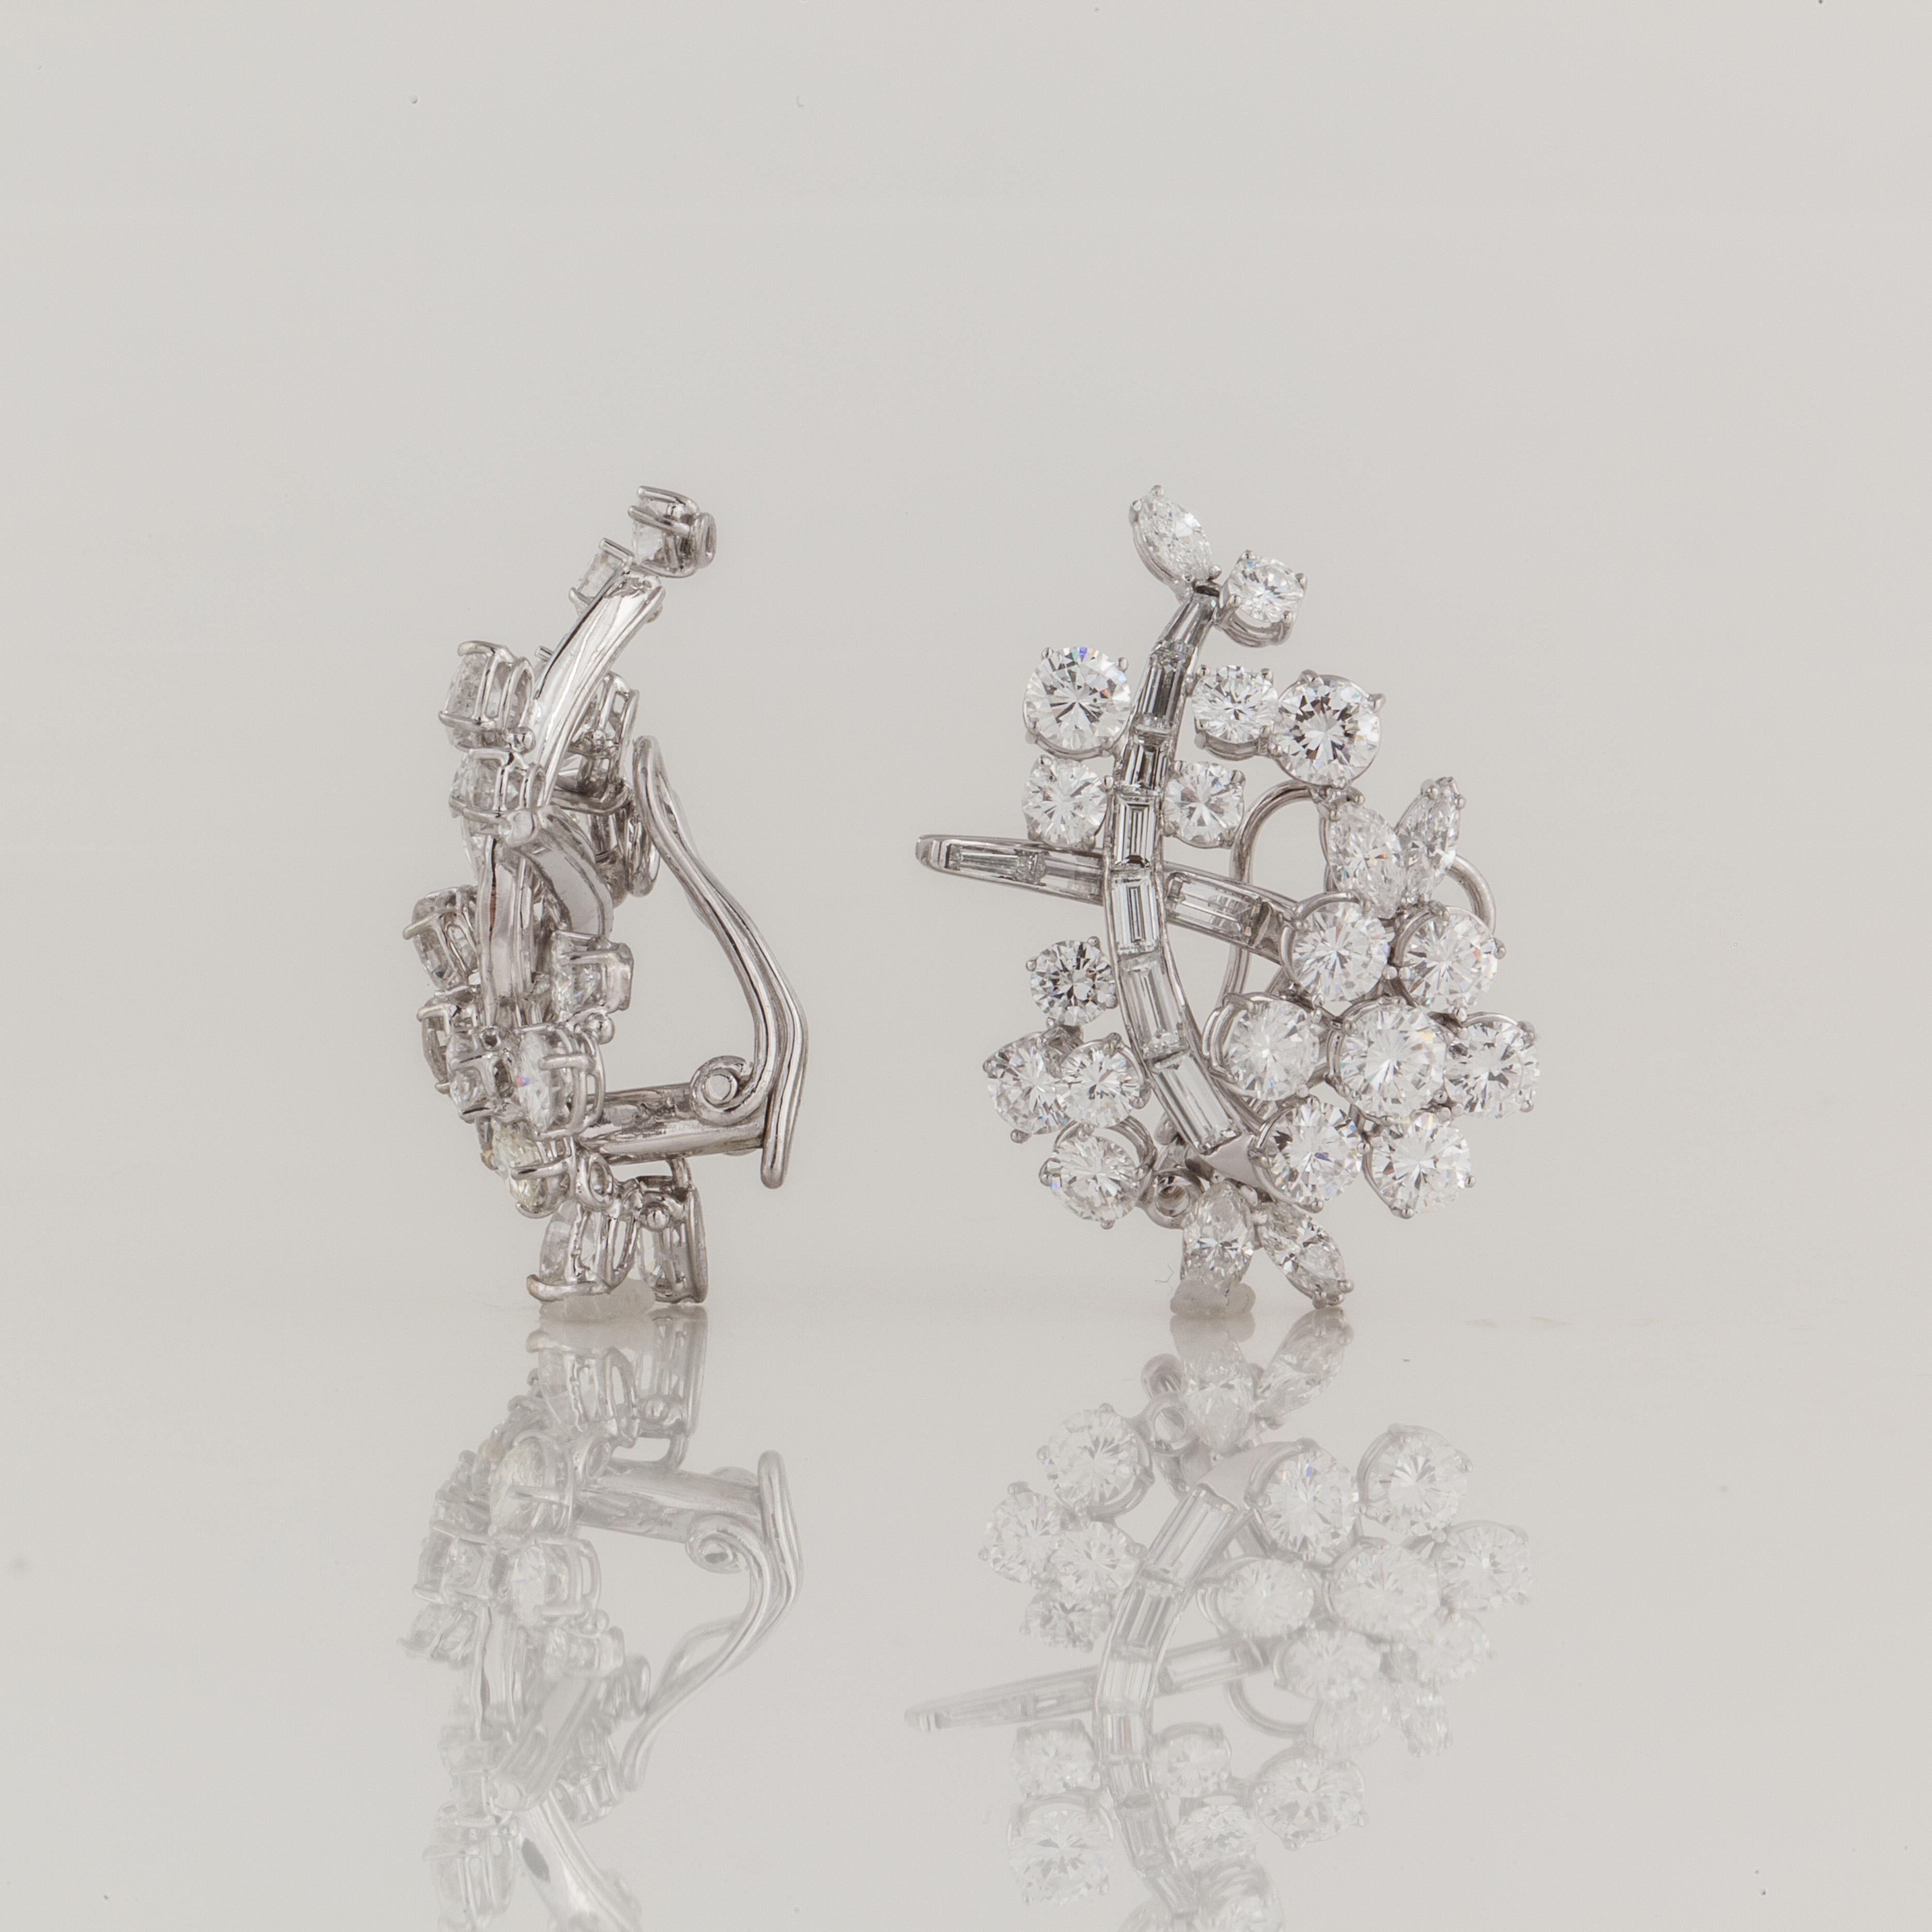 Platinum diamond cluster earrings with 18K white gold lever backs.  There are round, marquise and baguette diamonds that total 8.50 carats, G-H color and VVS-VS clarity.  They measure 1 1/4 inches long and 7/8 inches wide.  They are clip backs.
	